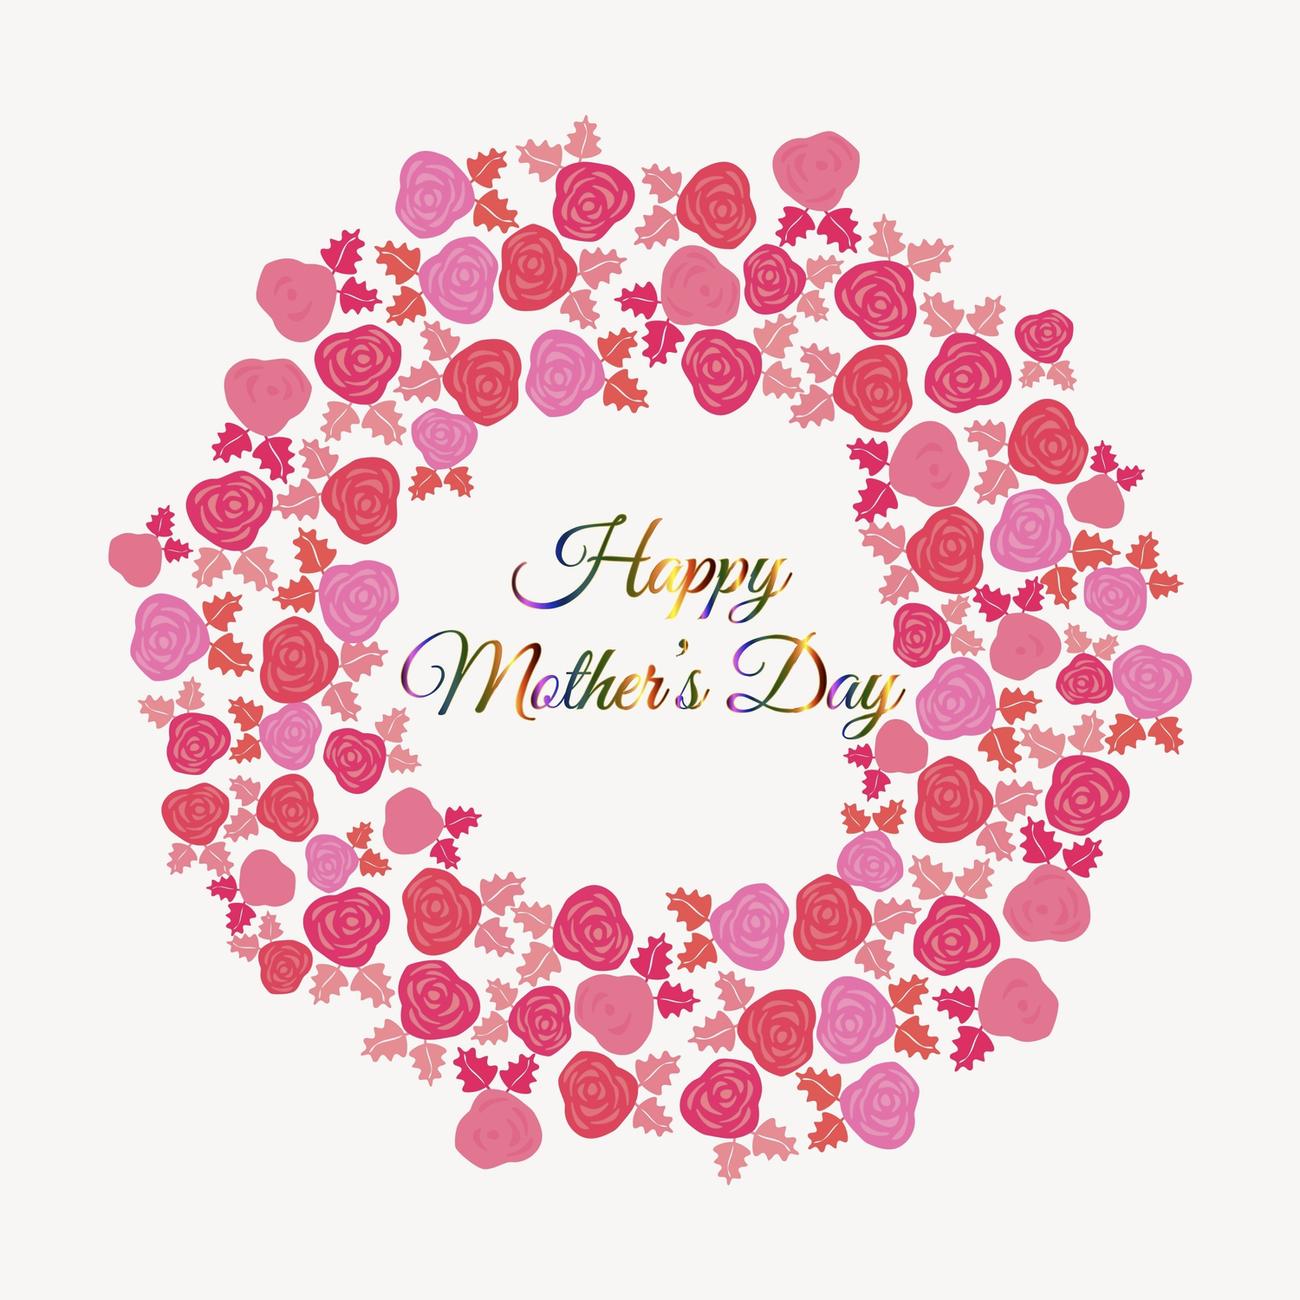 Happy Mother's Day clipart, Spring